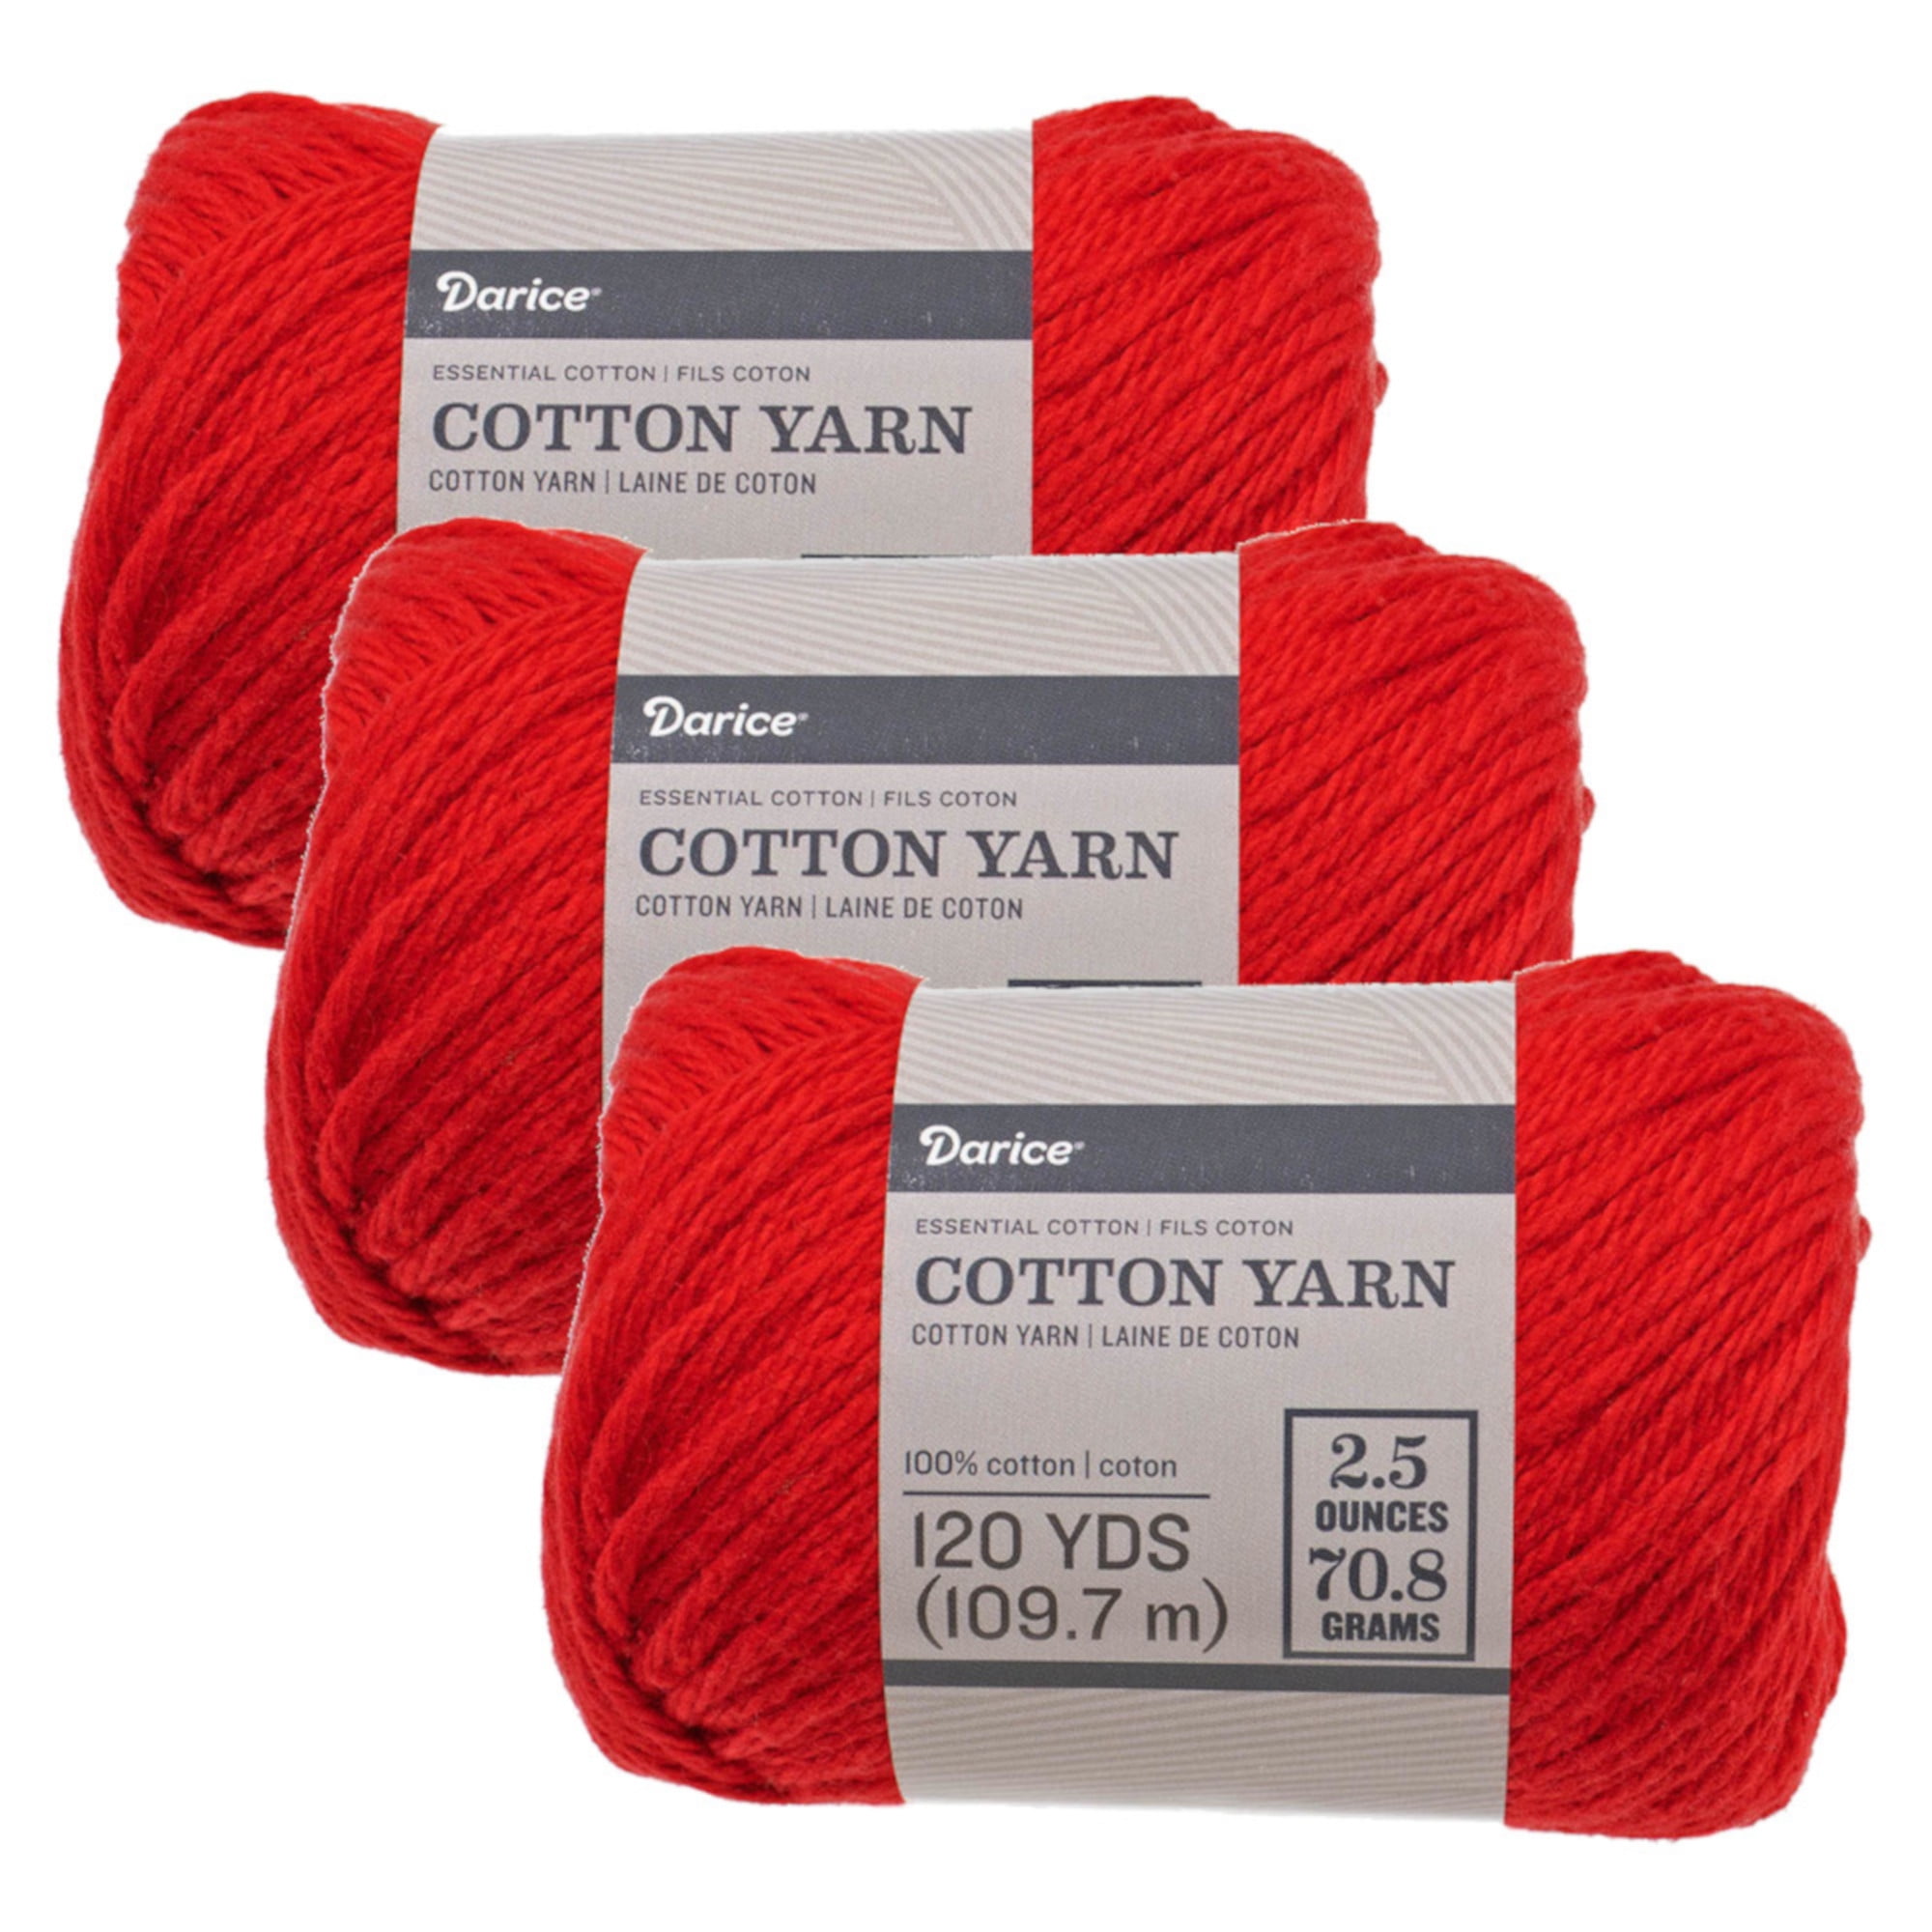 Paint Box YARN 1 Skein Red Wine Color 416 Lot 2604 100% Cotton #3 Light